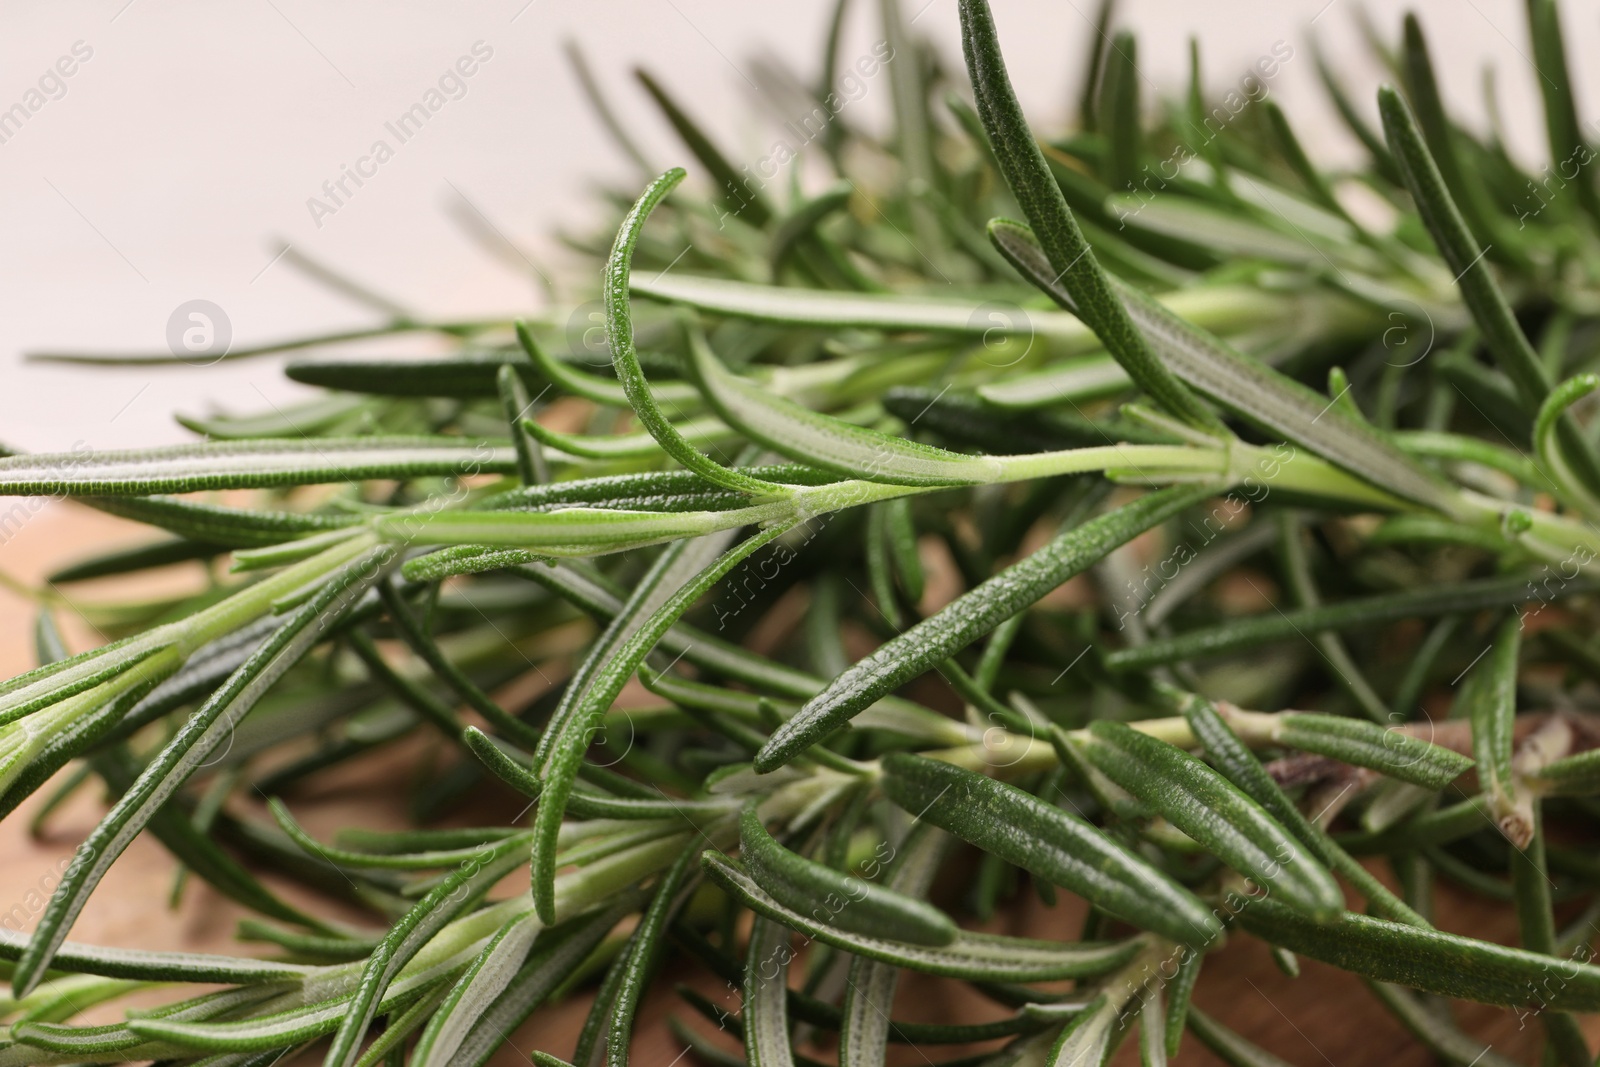 Photo of Sprigs of fresh green rosemary, closeup view